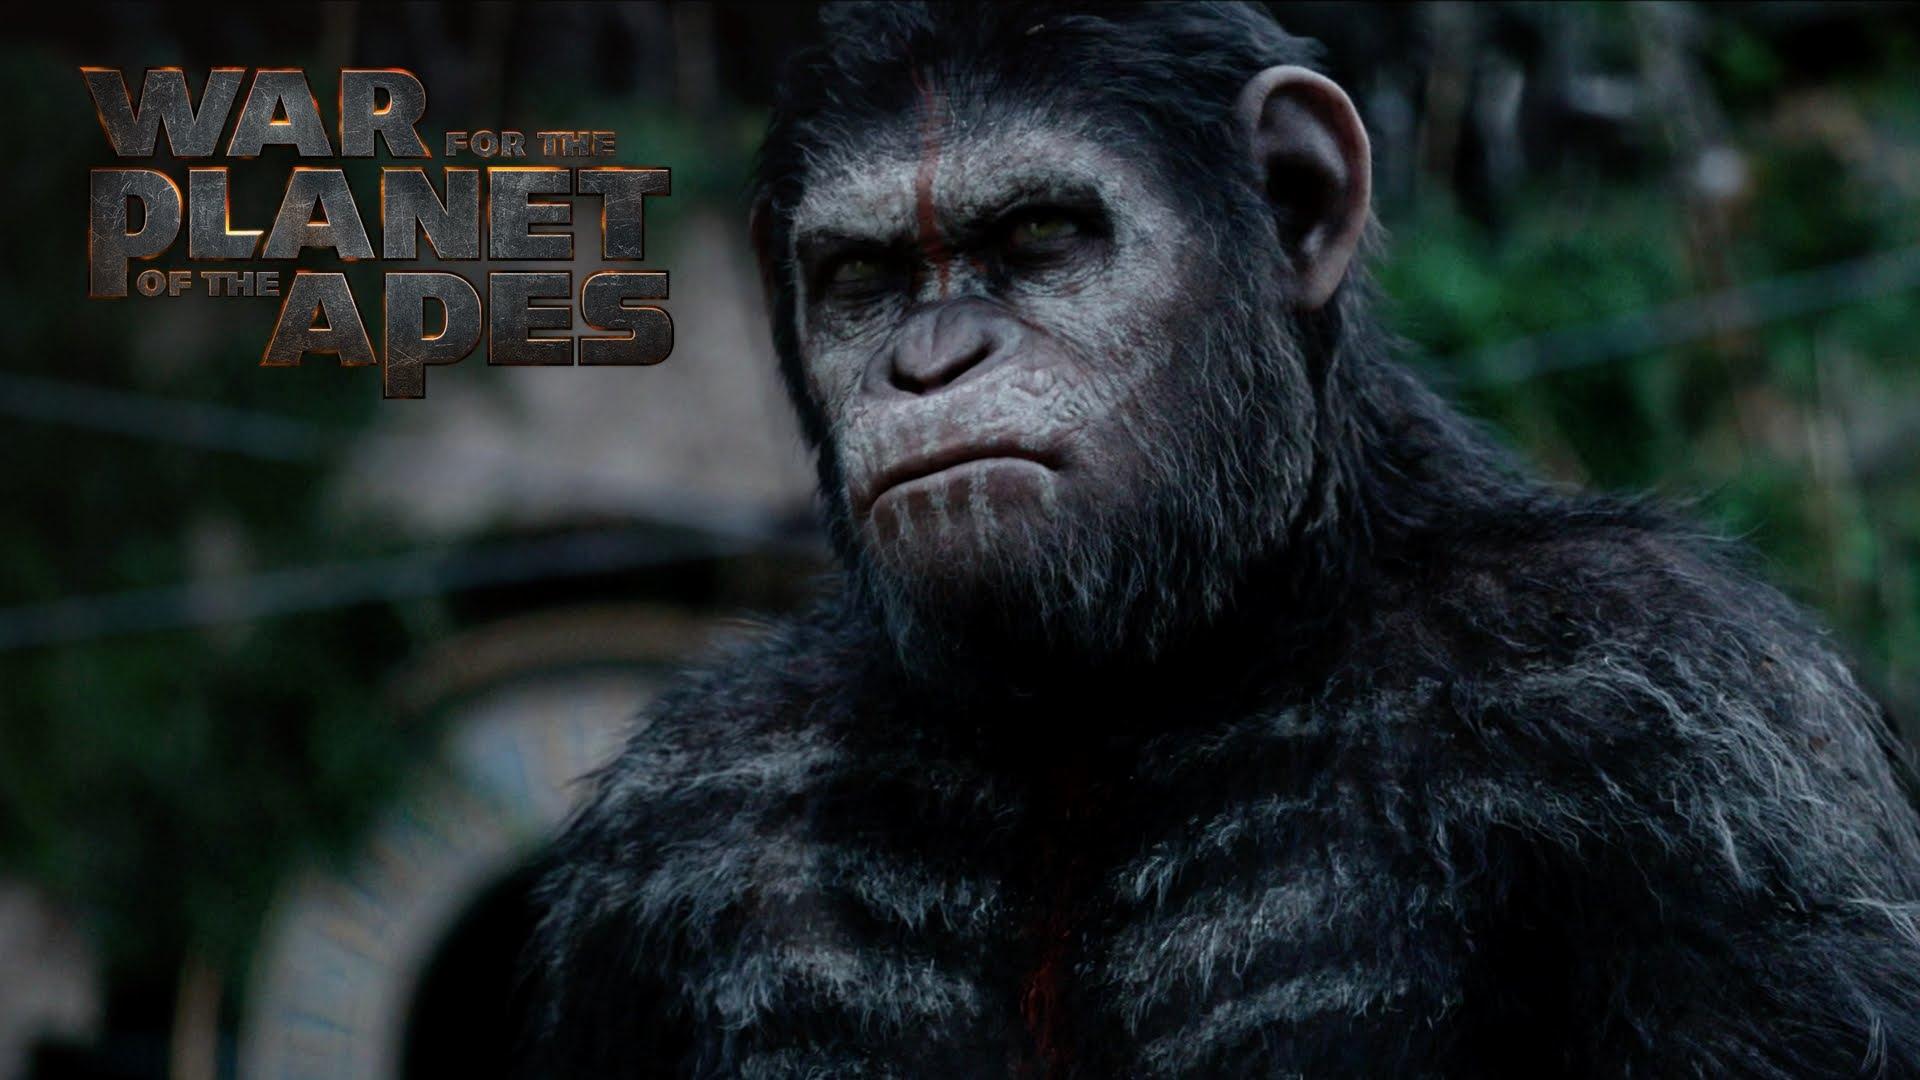 Inspirational War for the Planet Of the Apes Wallpaper